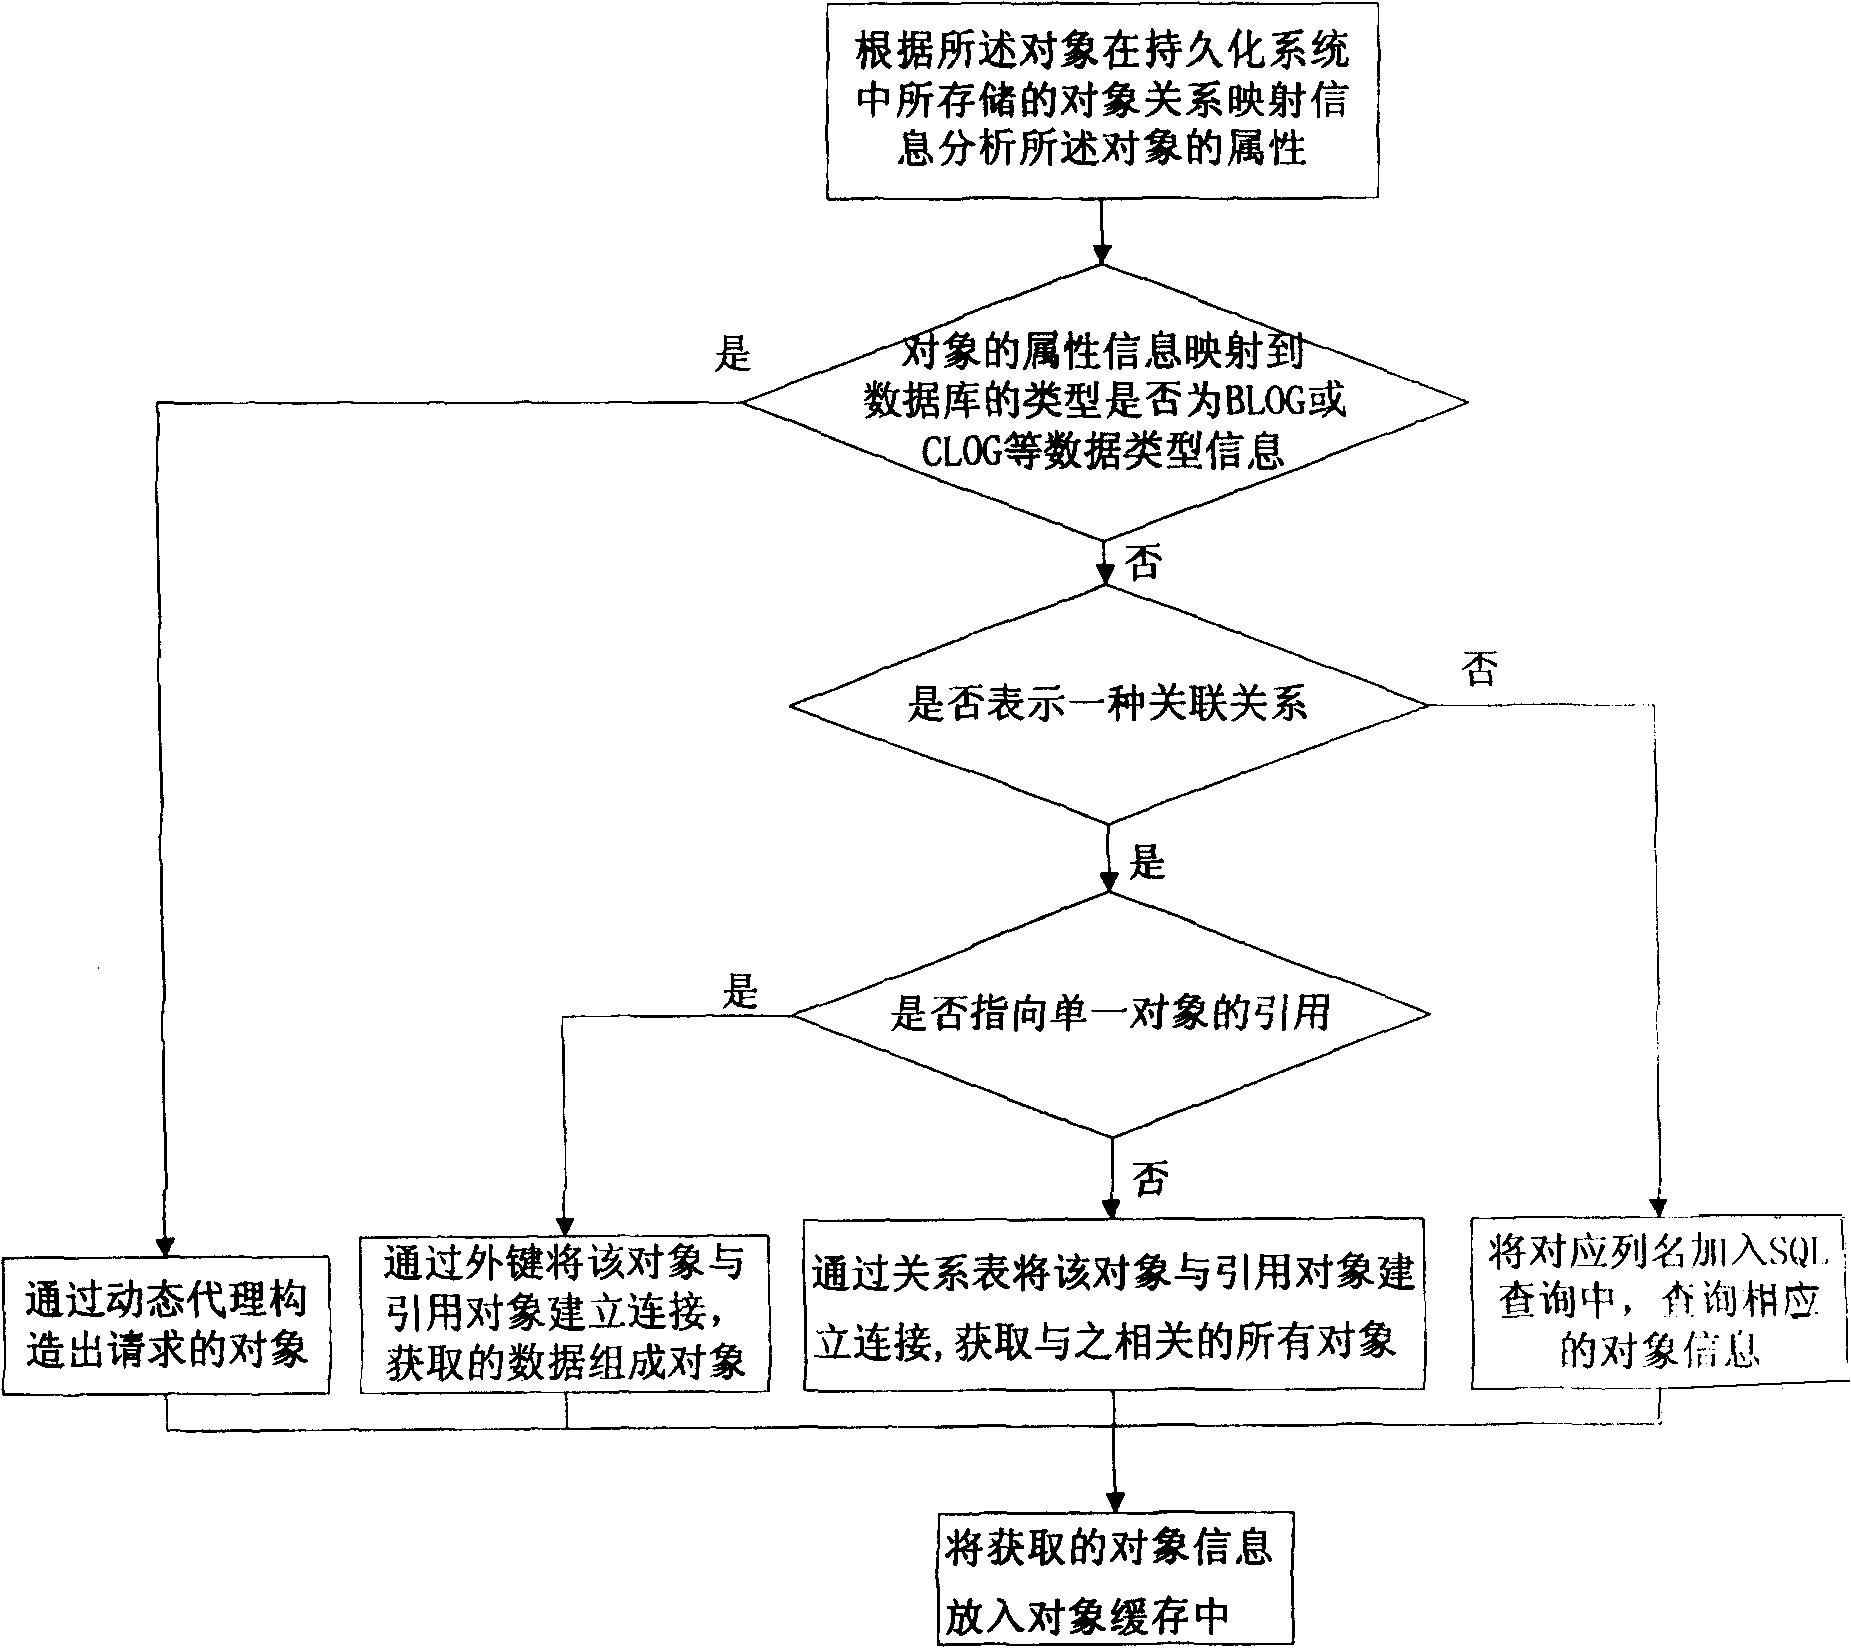 Method for prefetching object